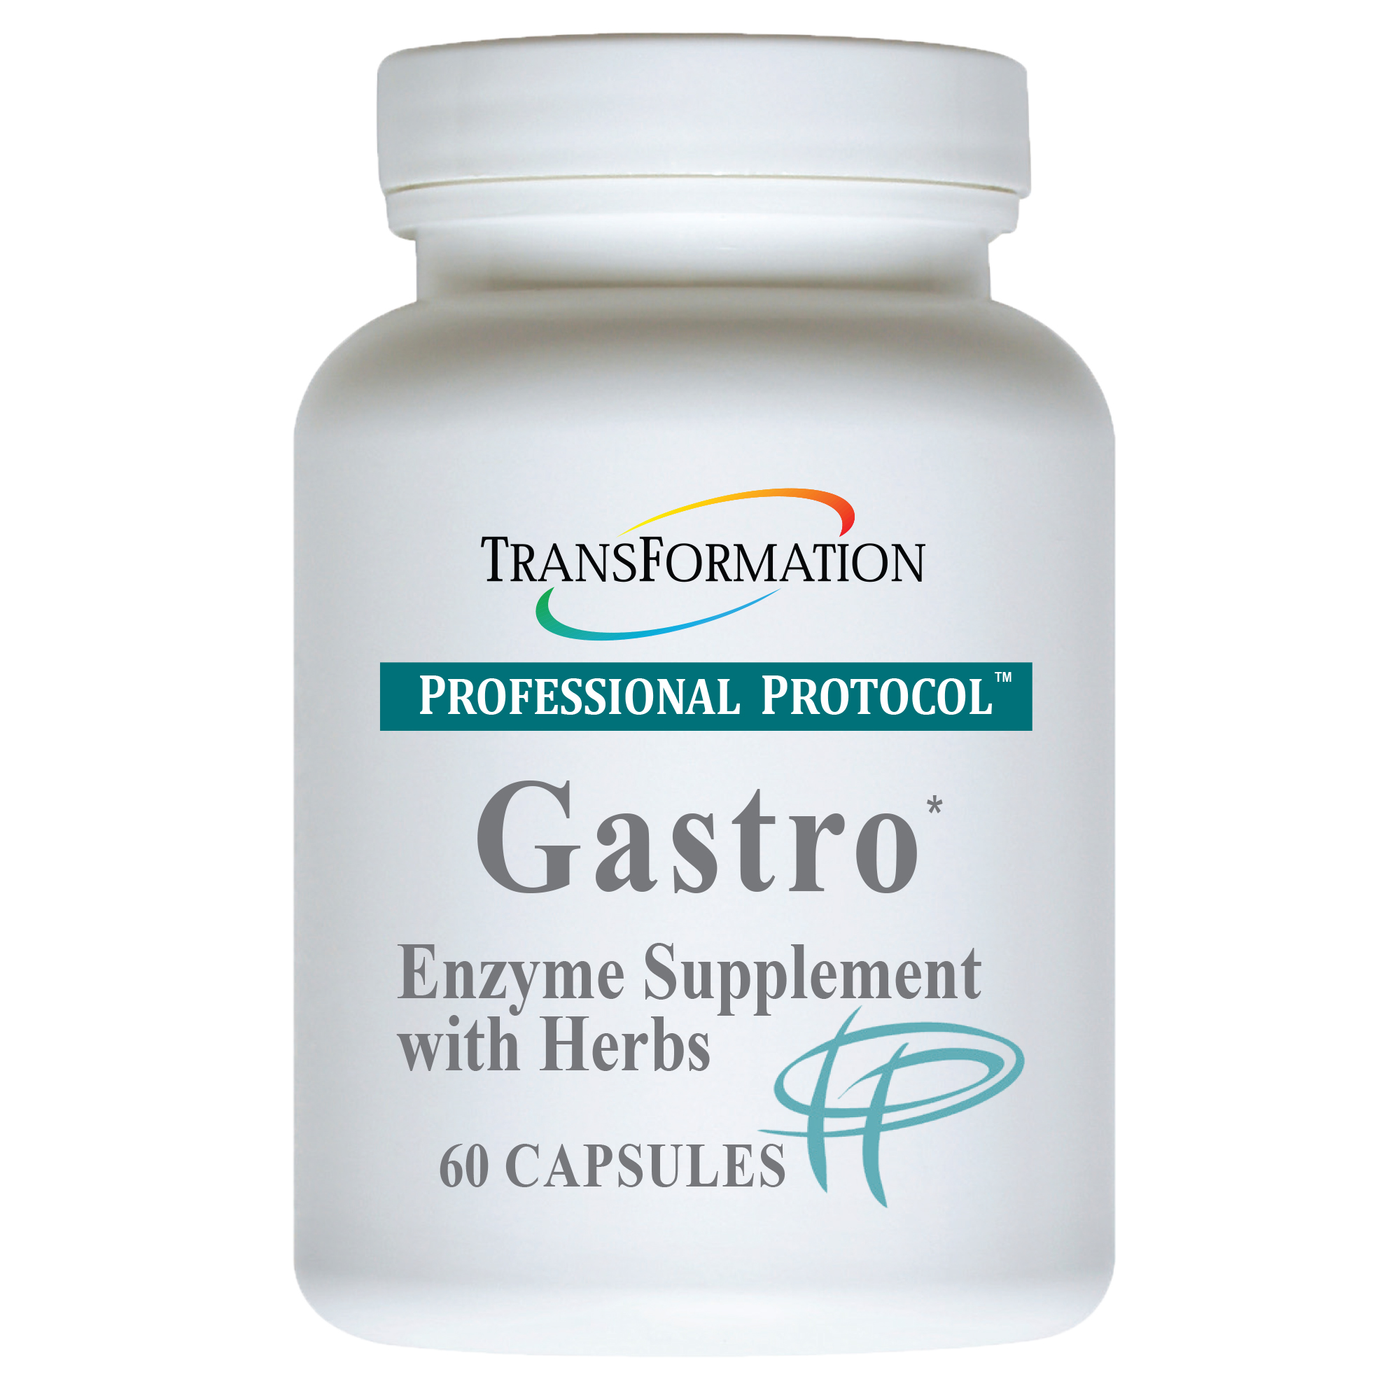 Gastro*  Curated Wellness